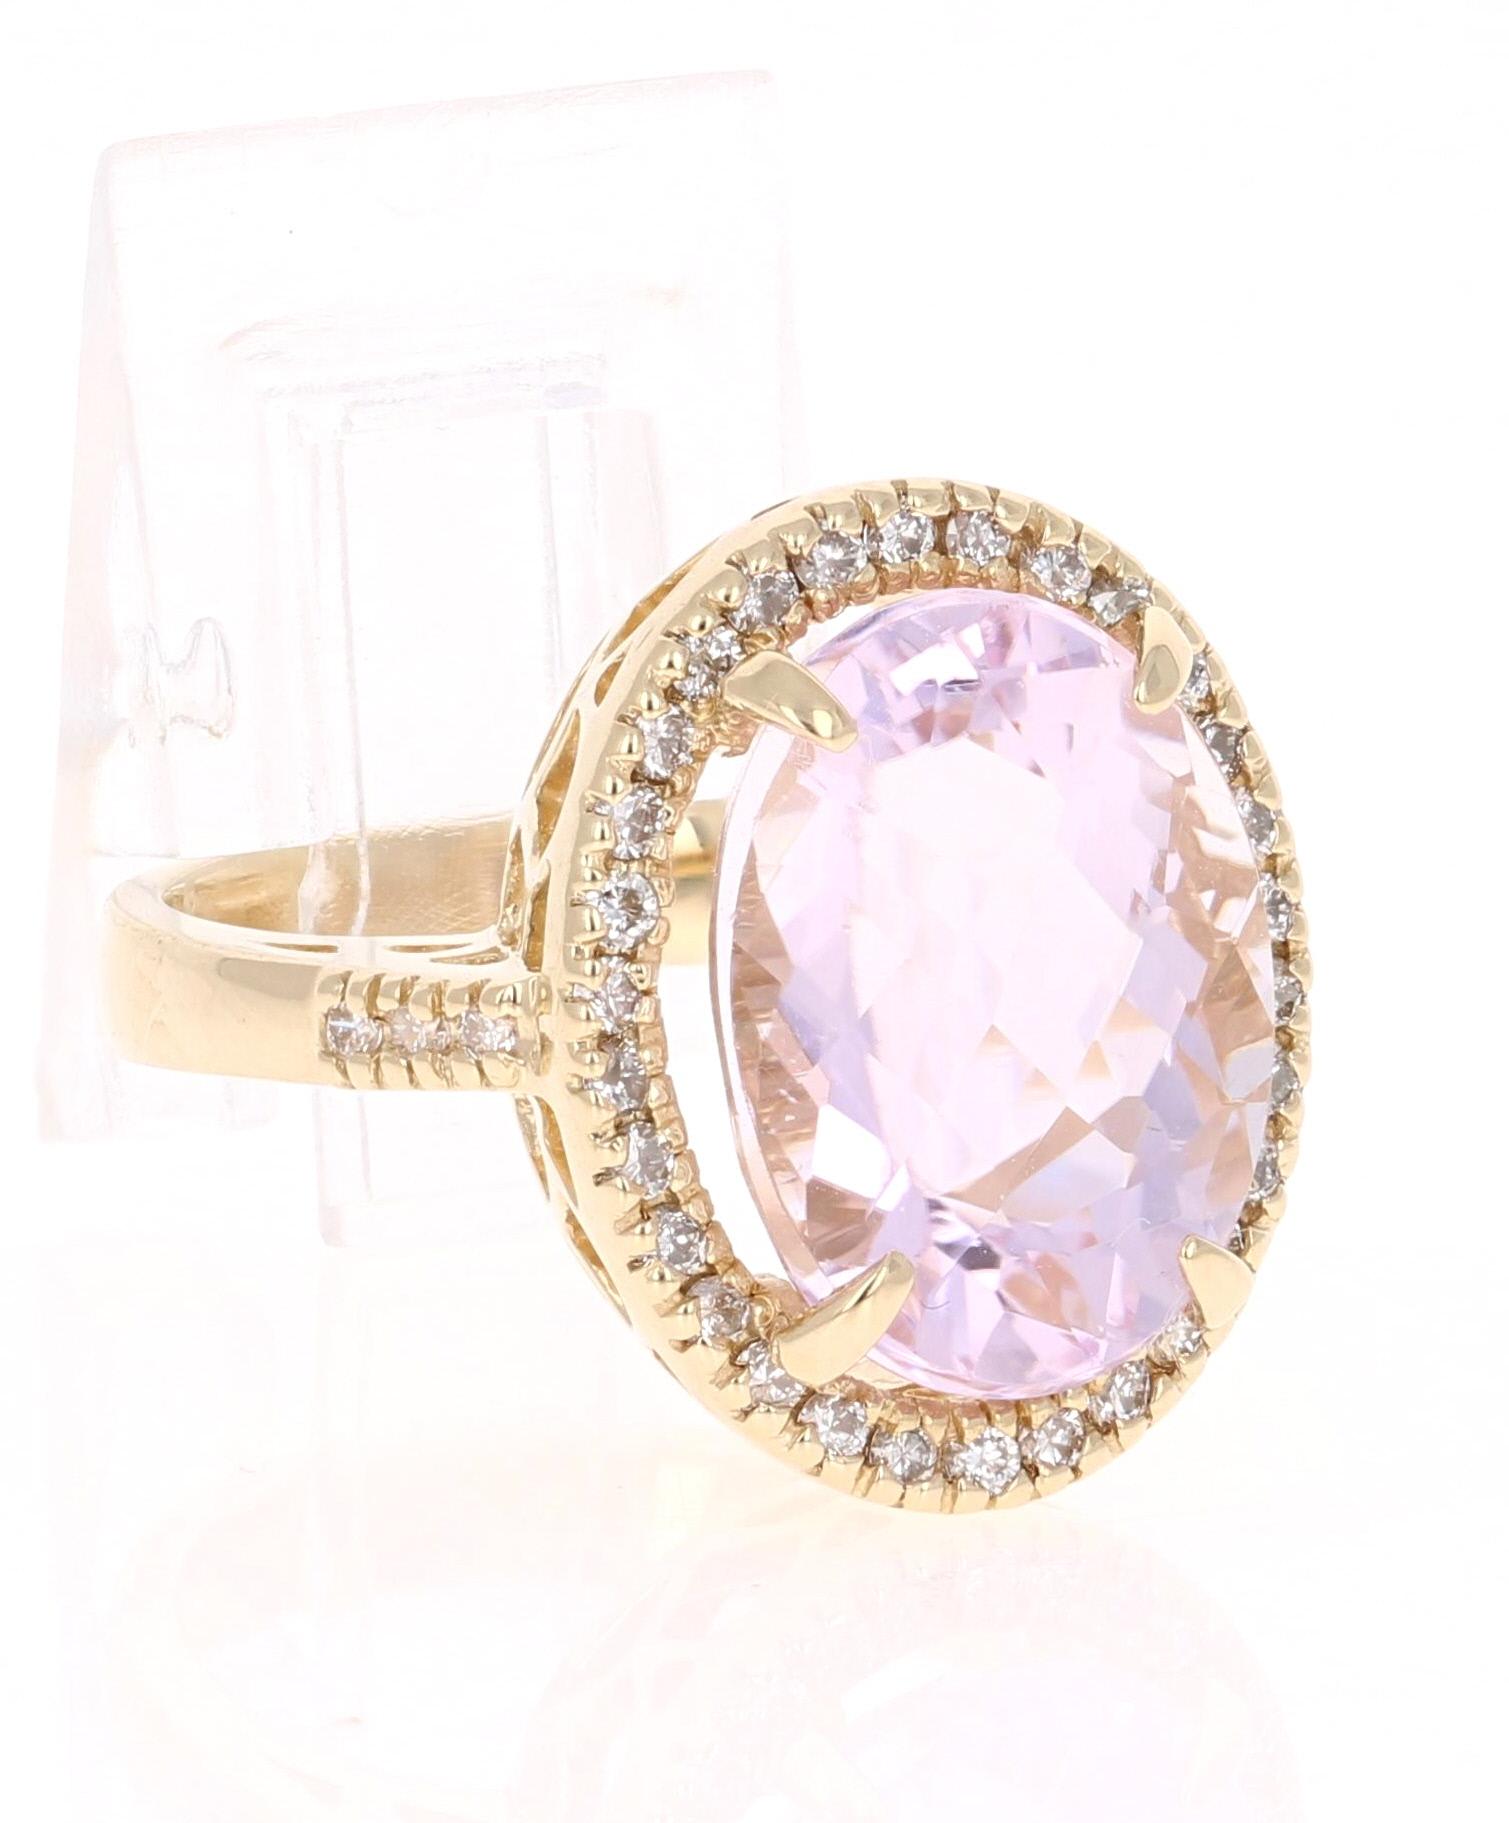 This beautiful piece has a 11.33 carat Oval Cut Kunzite that is set in the center of the ring, it is surrounded by 36 Round Cut Diamonds that weigh 0.53 carats.  The total carat weight of the ring is 11.86 carats. 

The ring is made in 14K Yellow